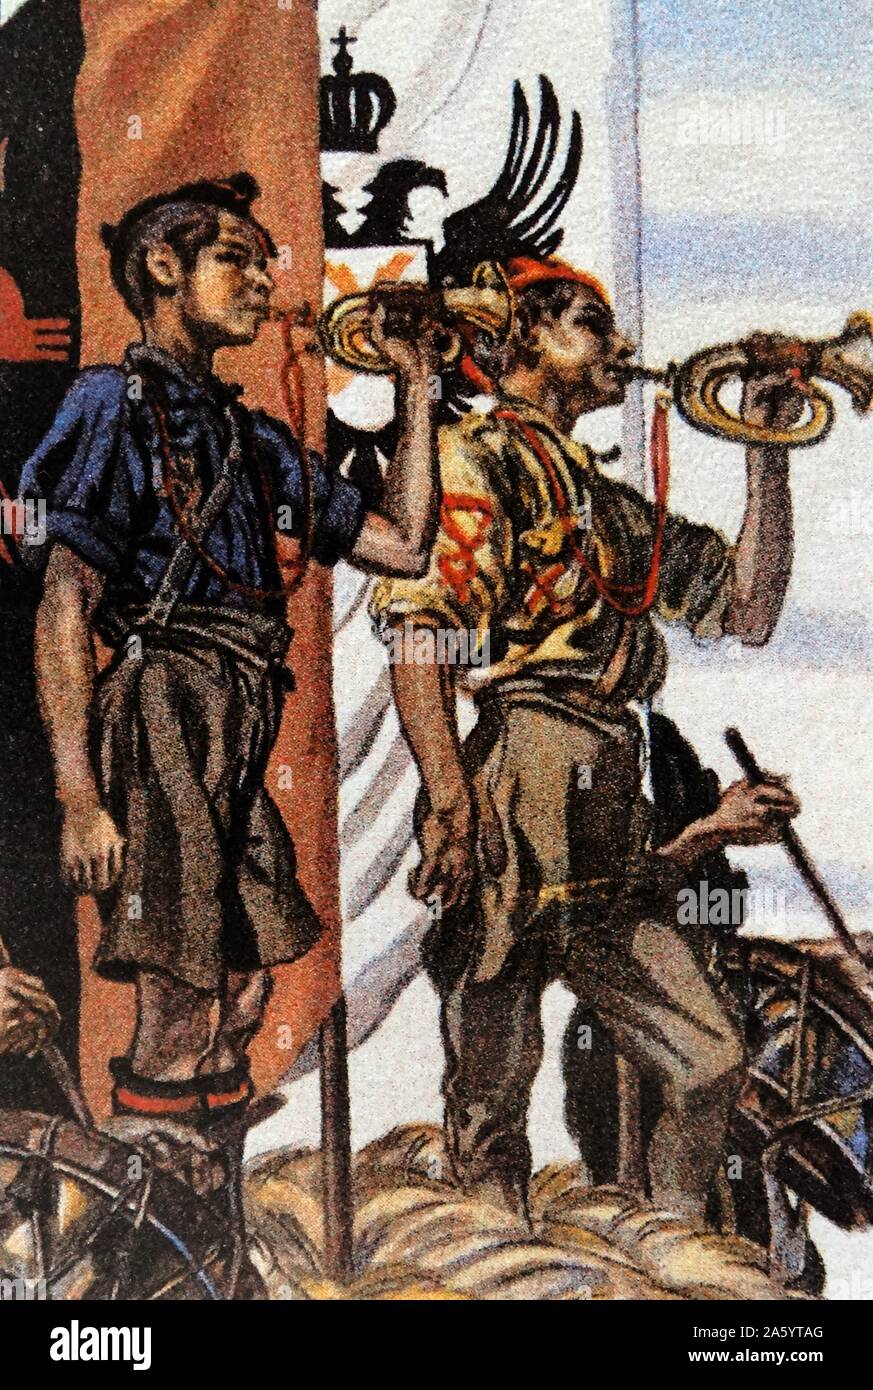 Pro-Franco illustration depicting patriotic Falange and Carlist youth during the Spanish Civil War Stock Photo